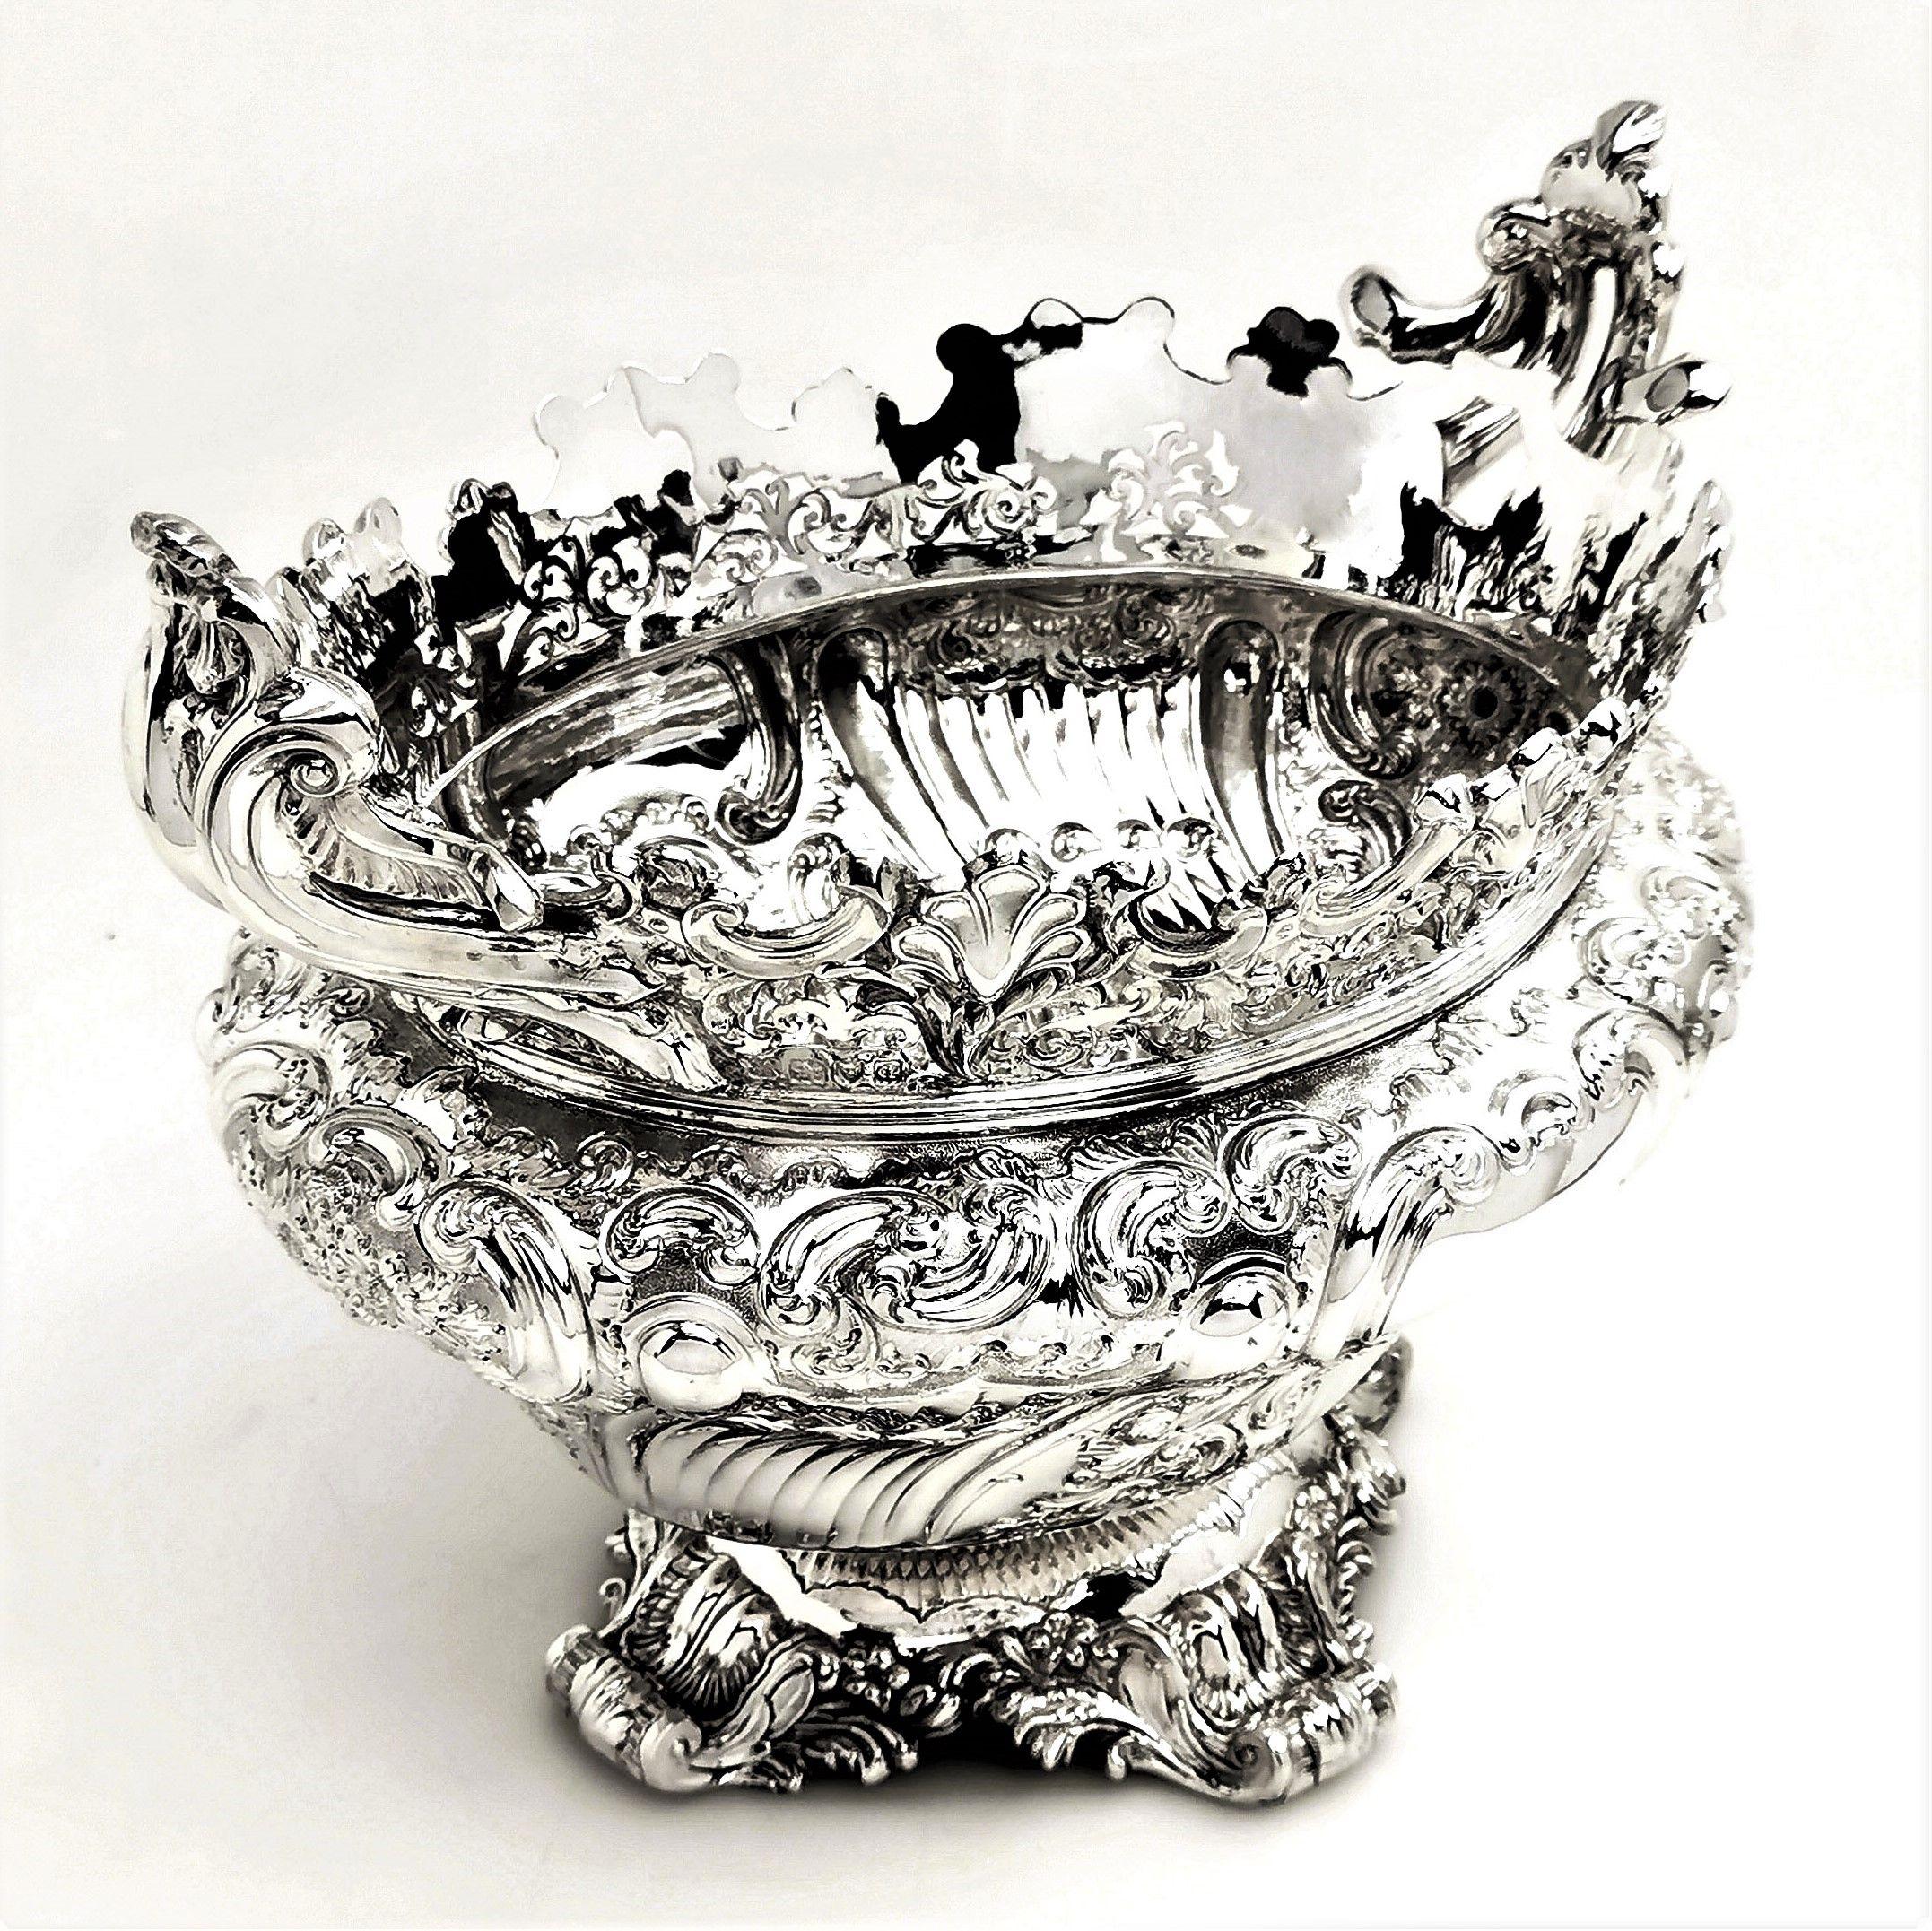 19th Century Antique Victorian Sterling Silver Bowl / Dish / Centrepiece, 1899